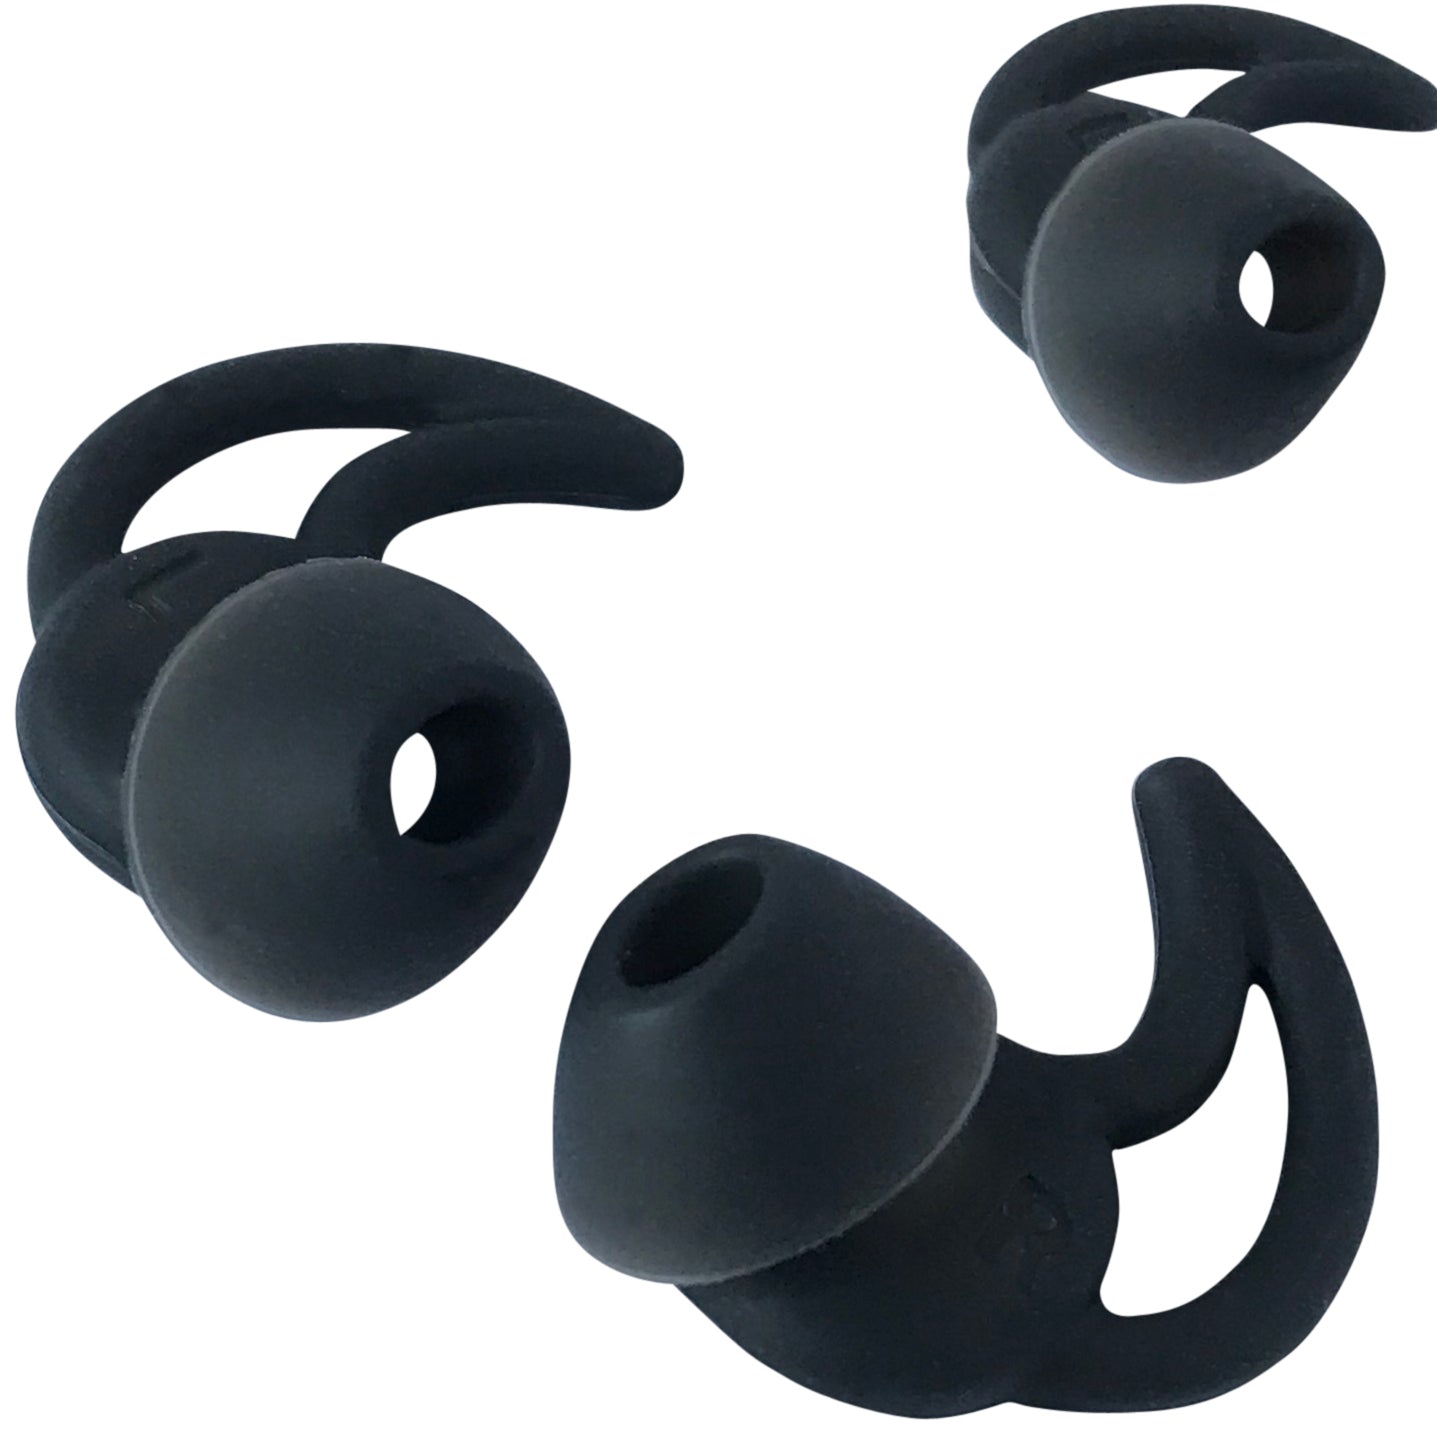 Replacement Ear Bud Tips Set for Bose SoundSport Truly Wireless In-Ear